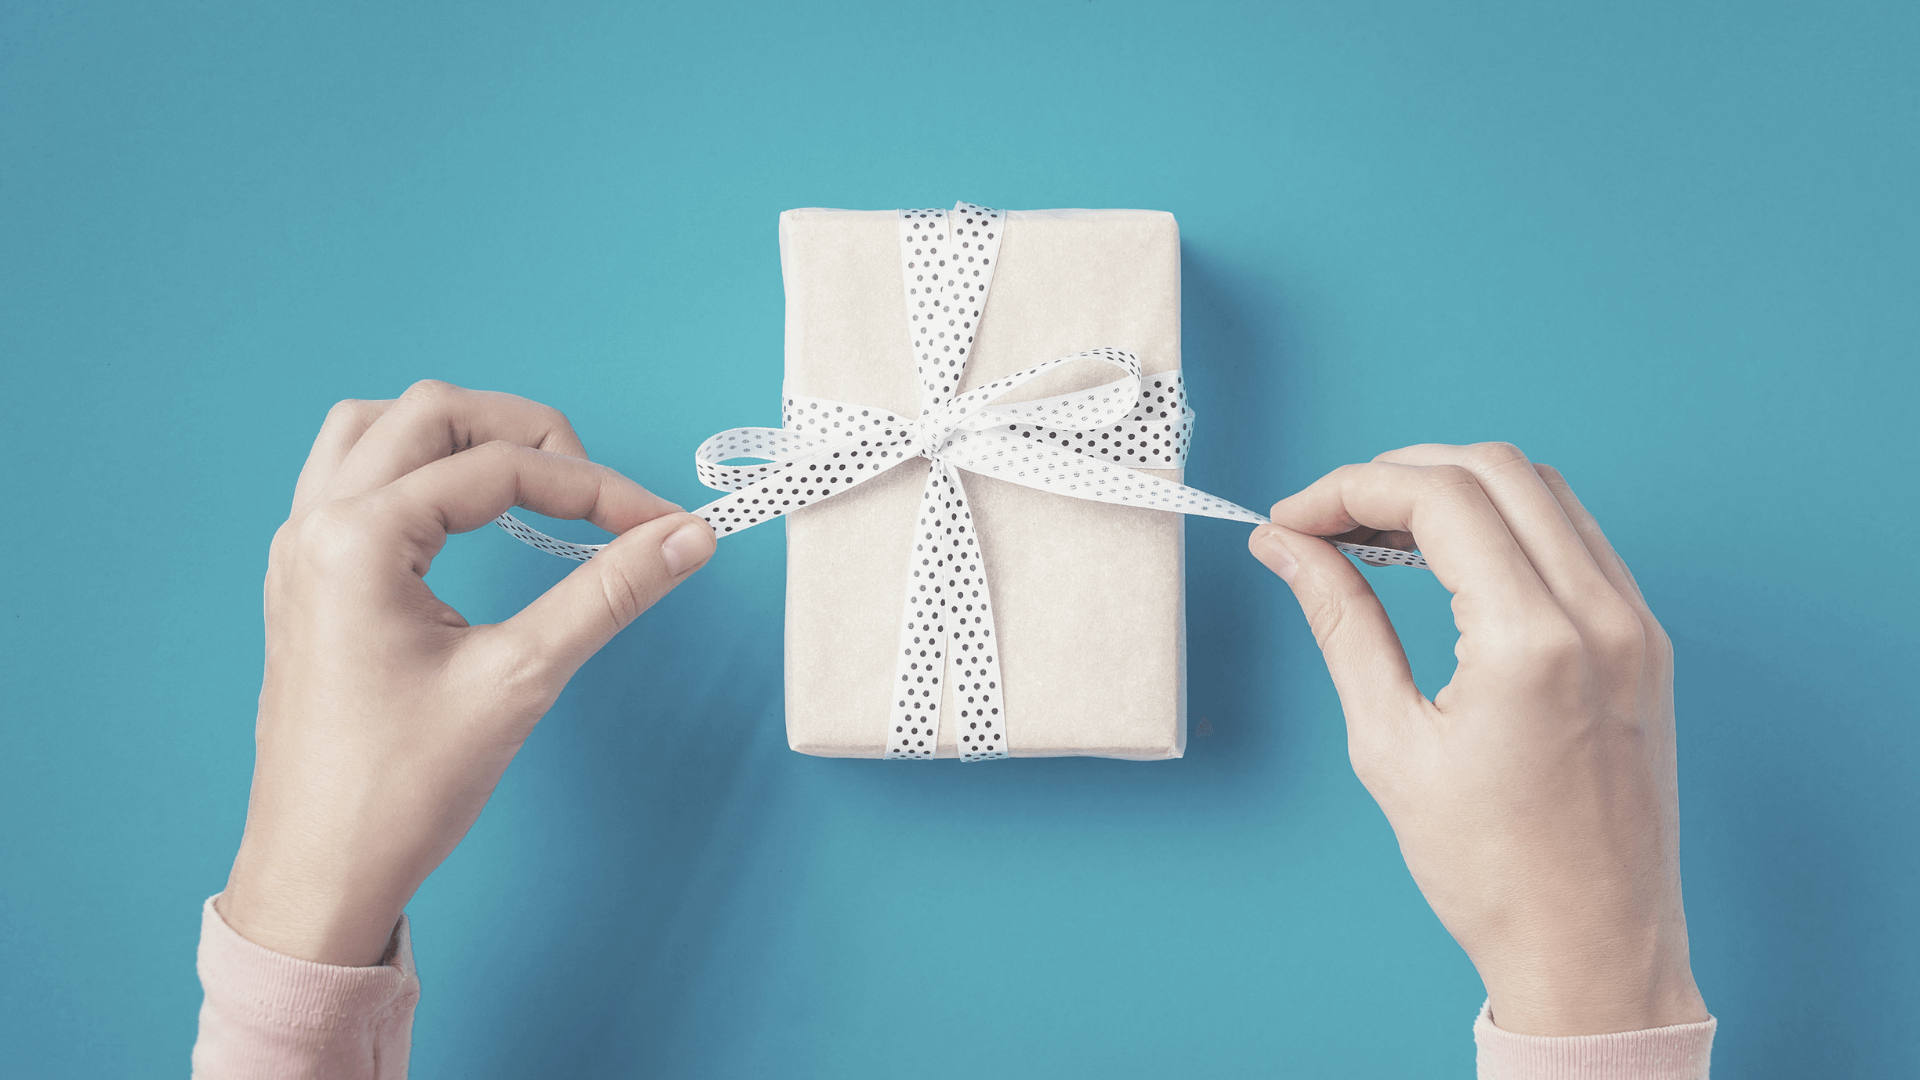 37 Wellness and Lifestyle﻿ Holiday Gift Ideas